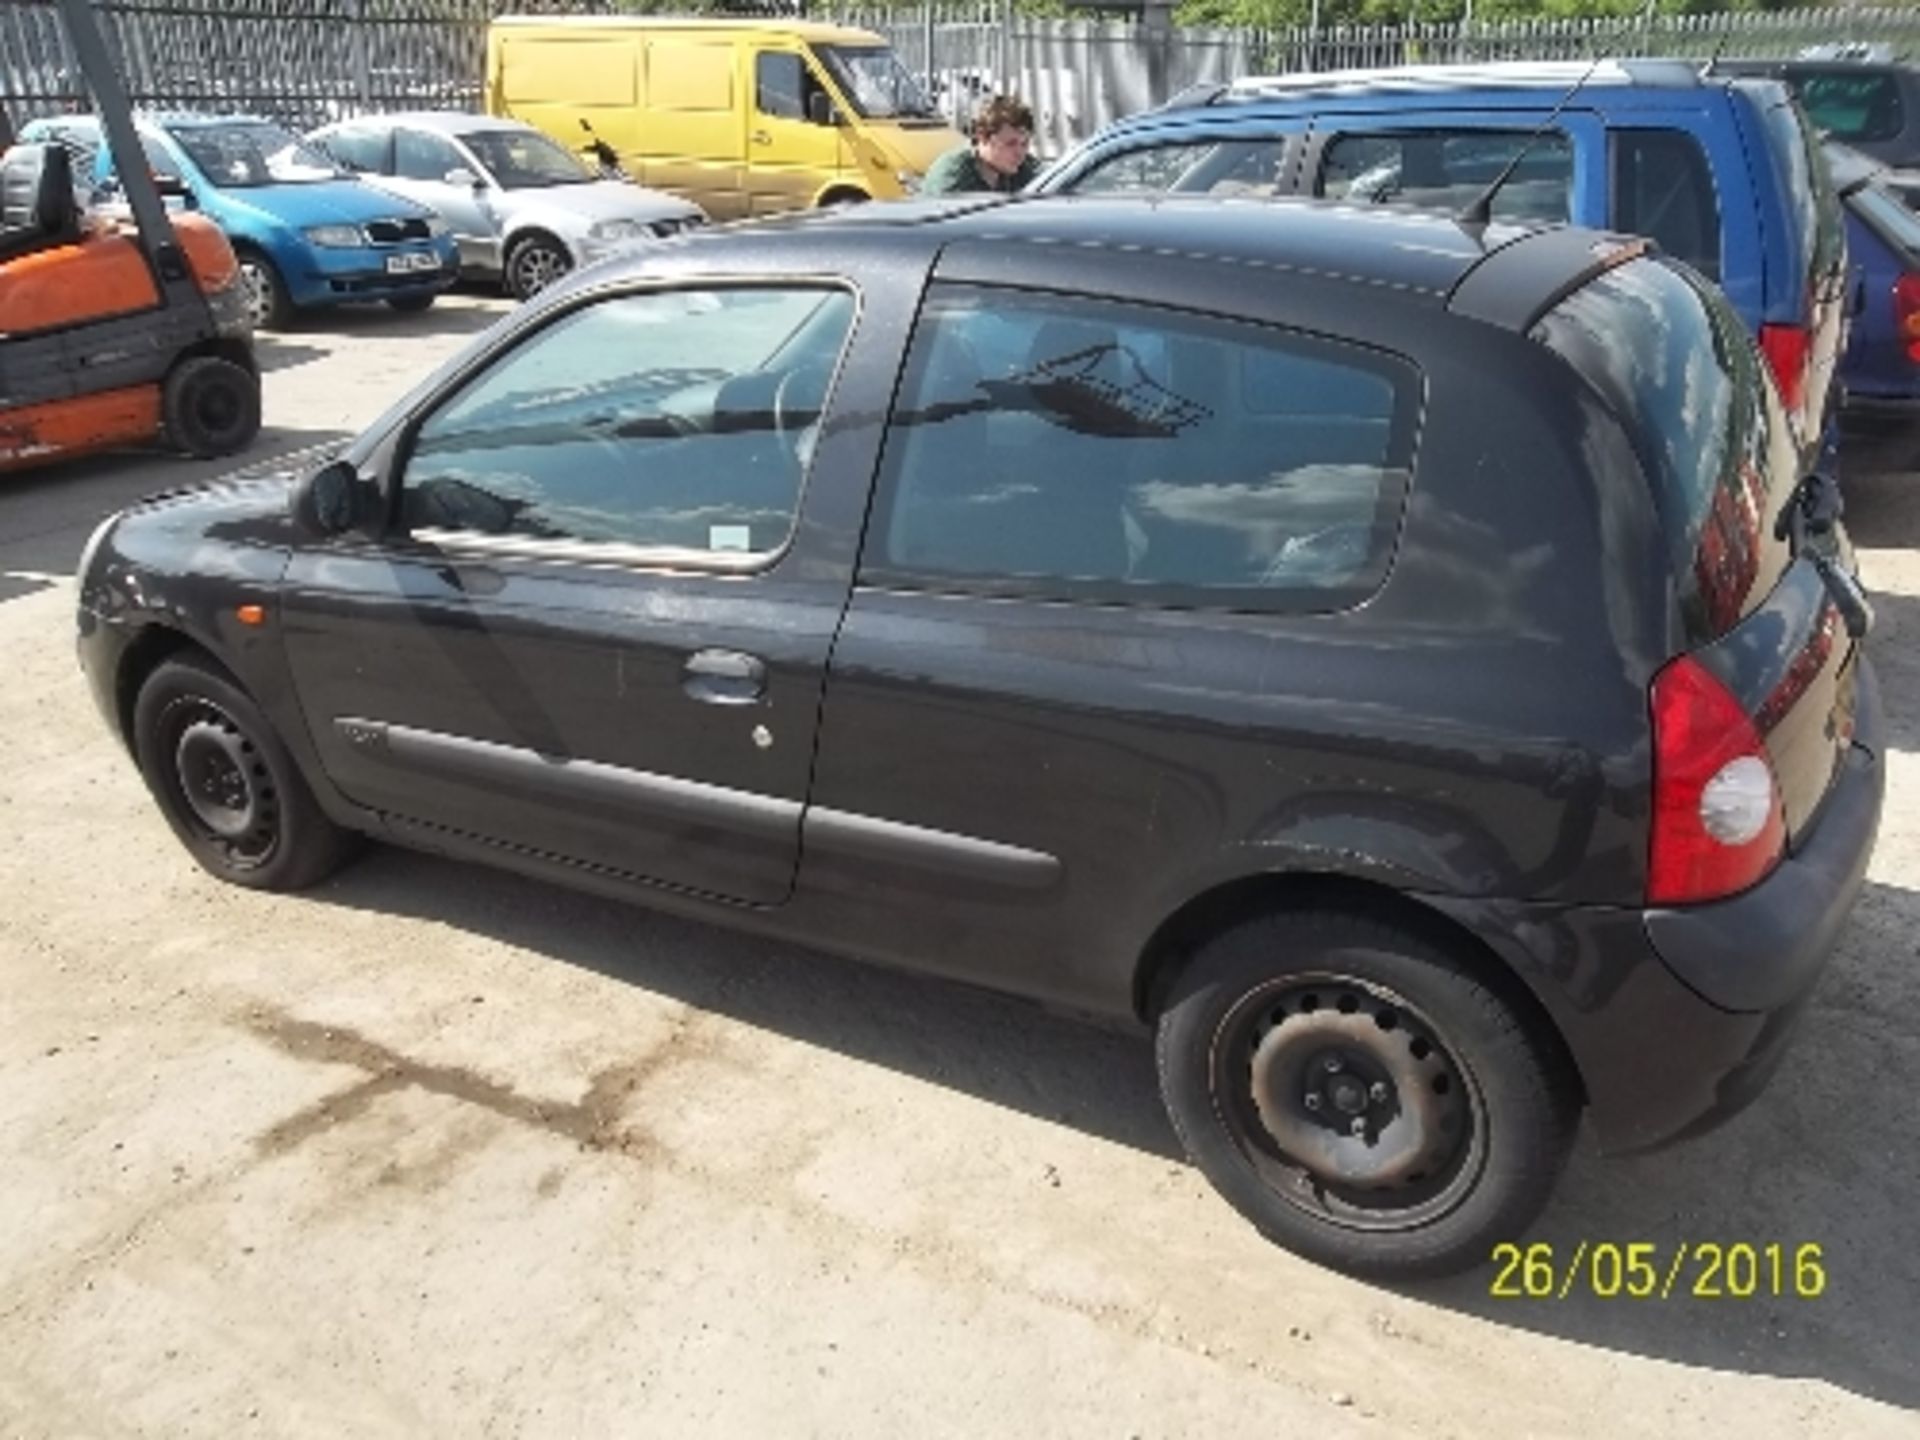 Renault Clio Expression - KY52 TLJ Date of registration: 05.11.2002 1149cc, petrol, manual, black - Image 4 of 4